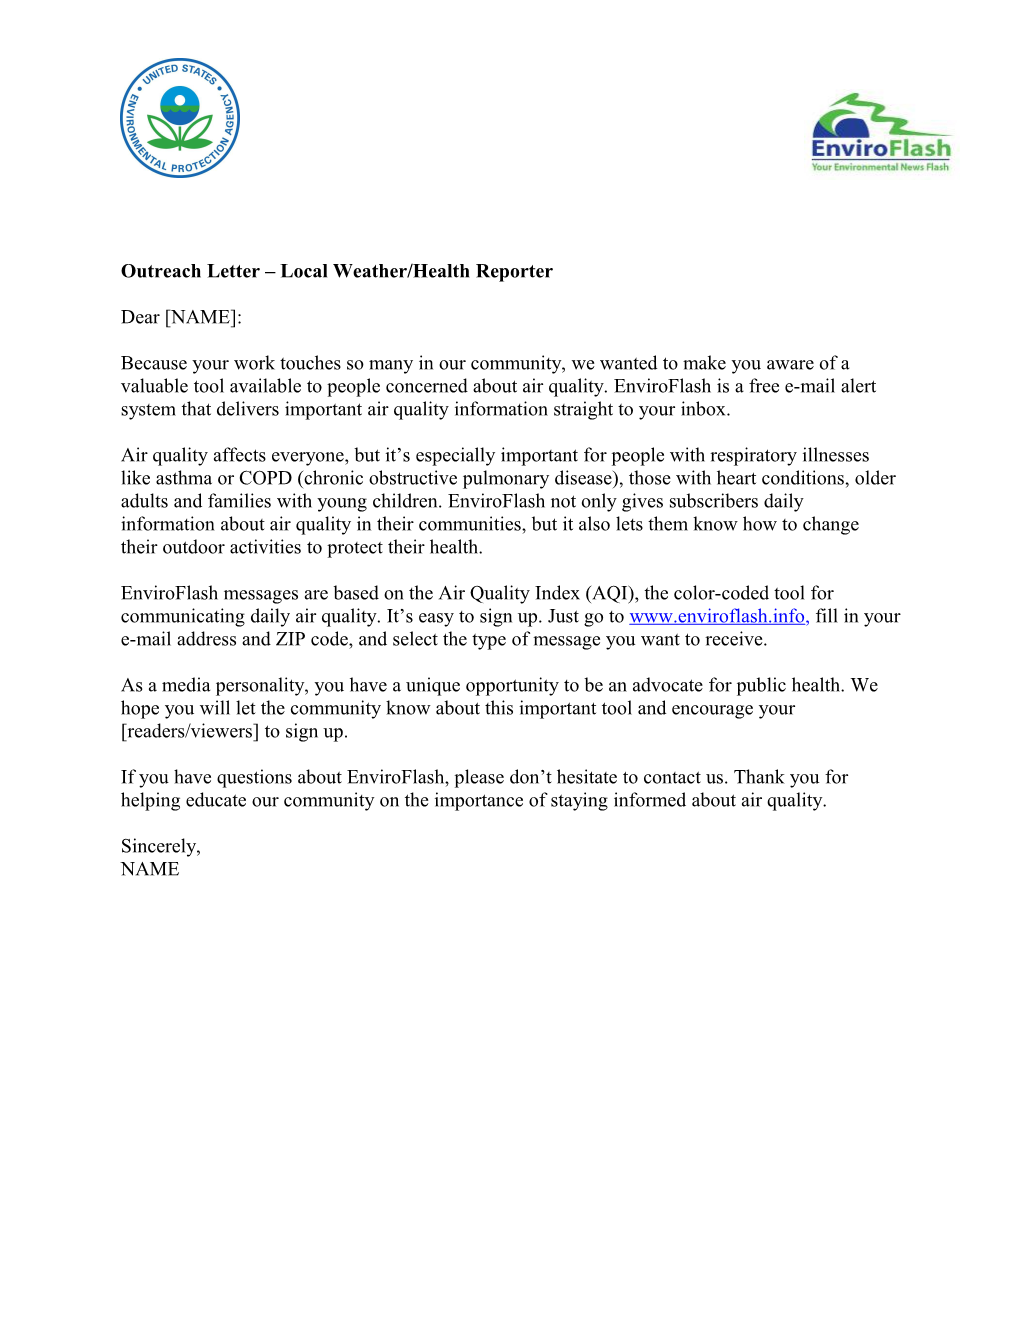 Outreach Letter Local Weather/Health Reporter